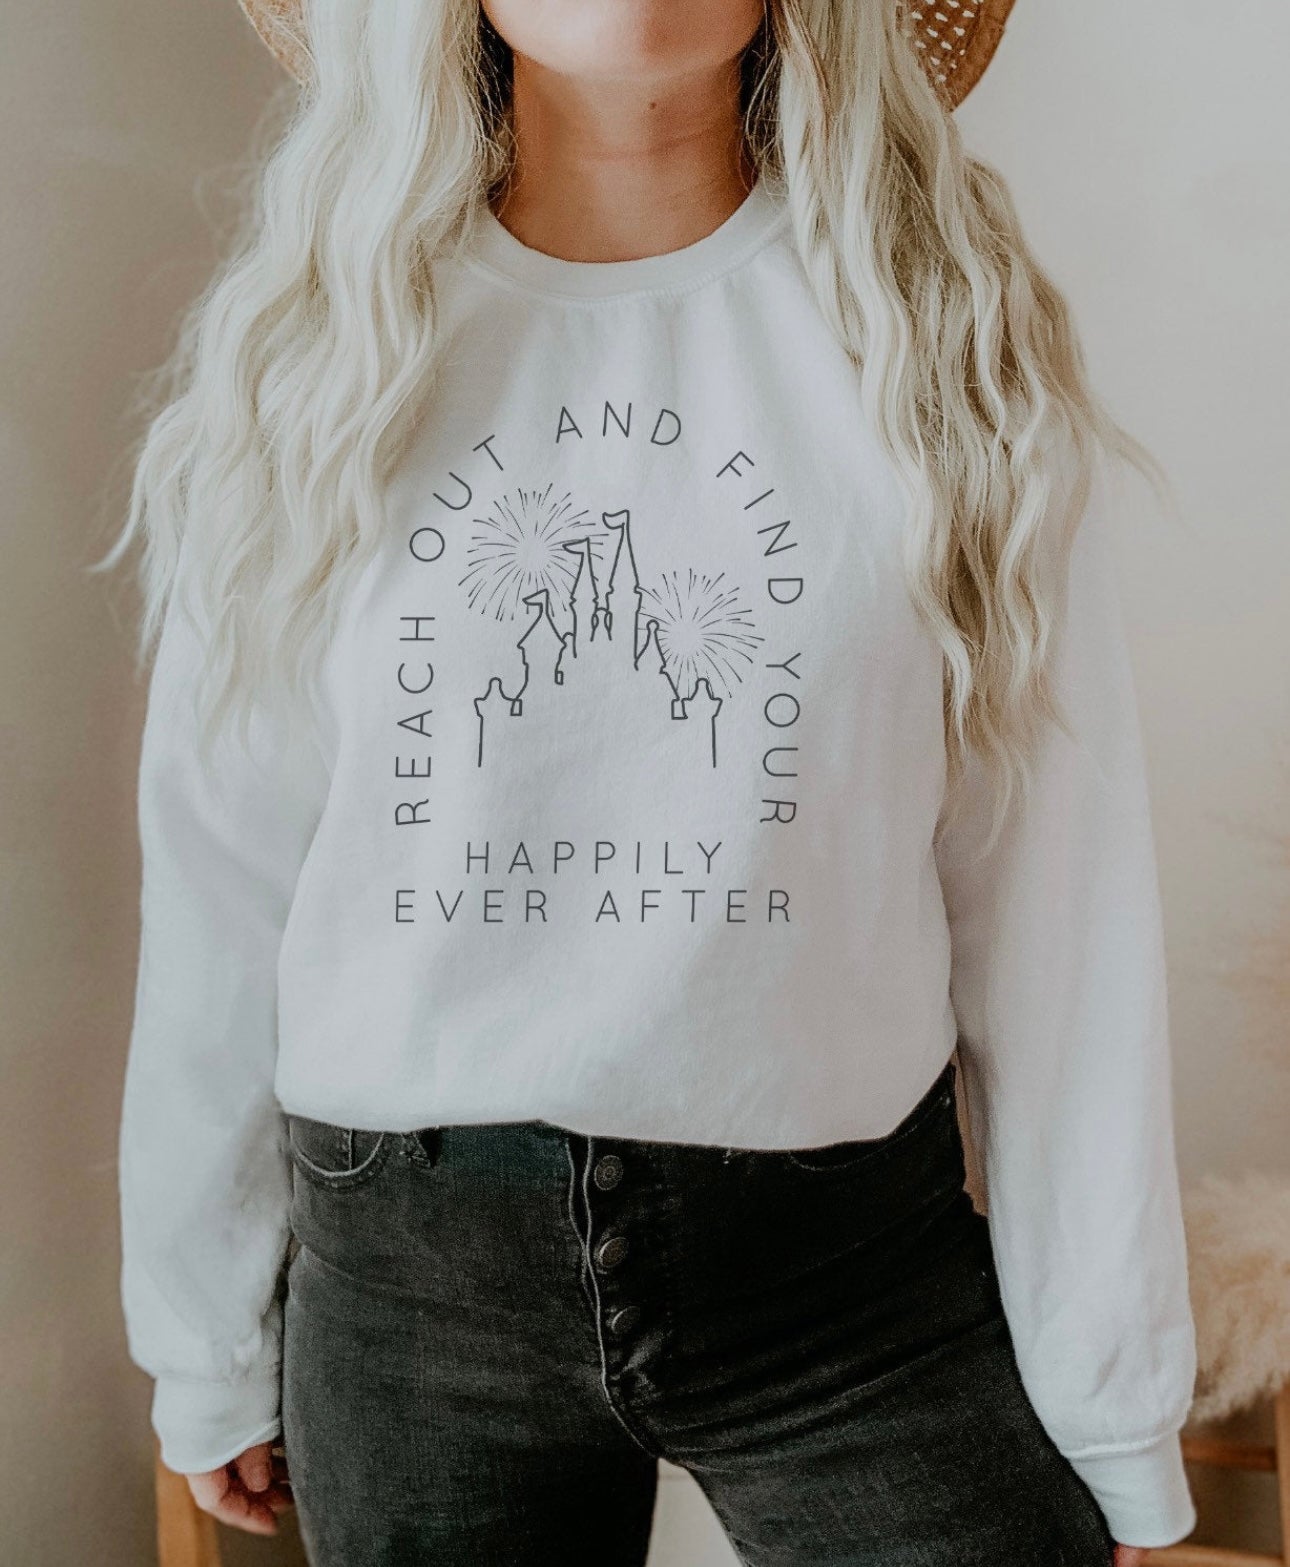 Reach Out And Find Your Happily Ever After Gildan Unisex Heavy Blend™ Crewneck Sweatshirt